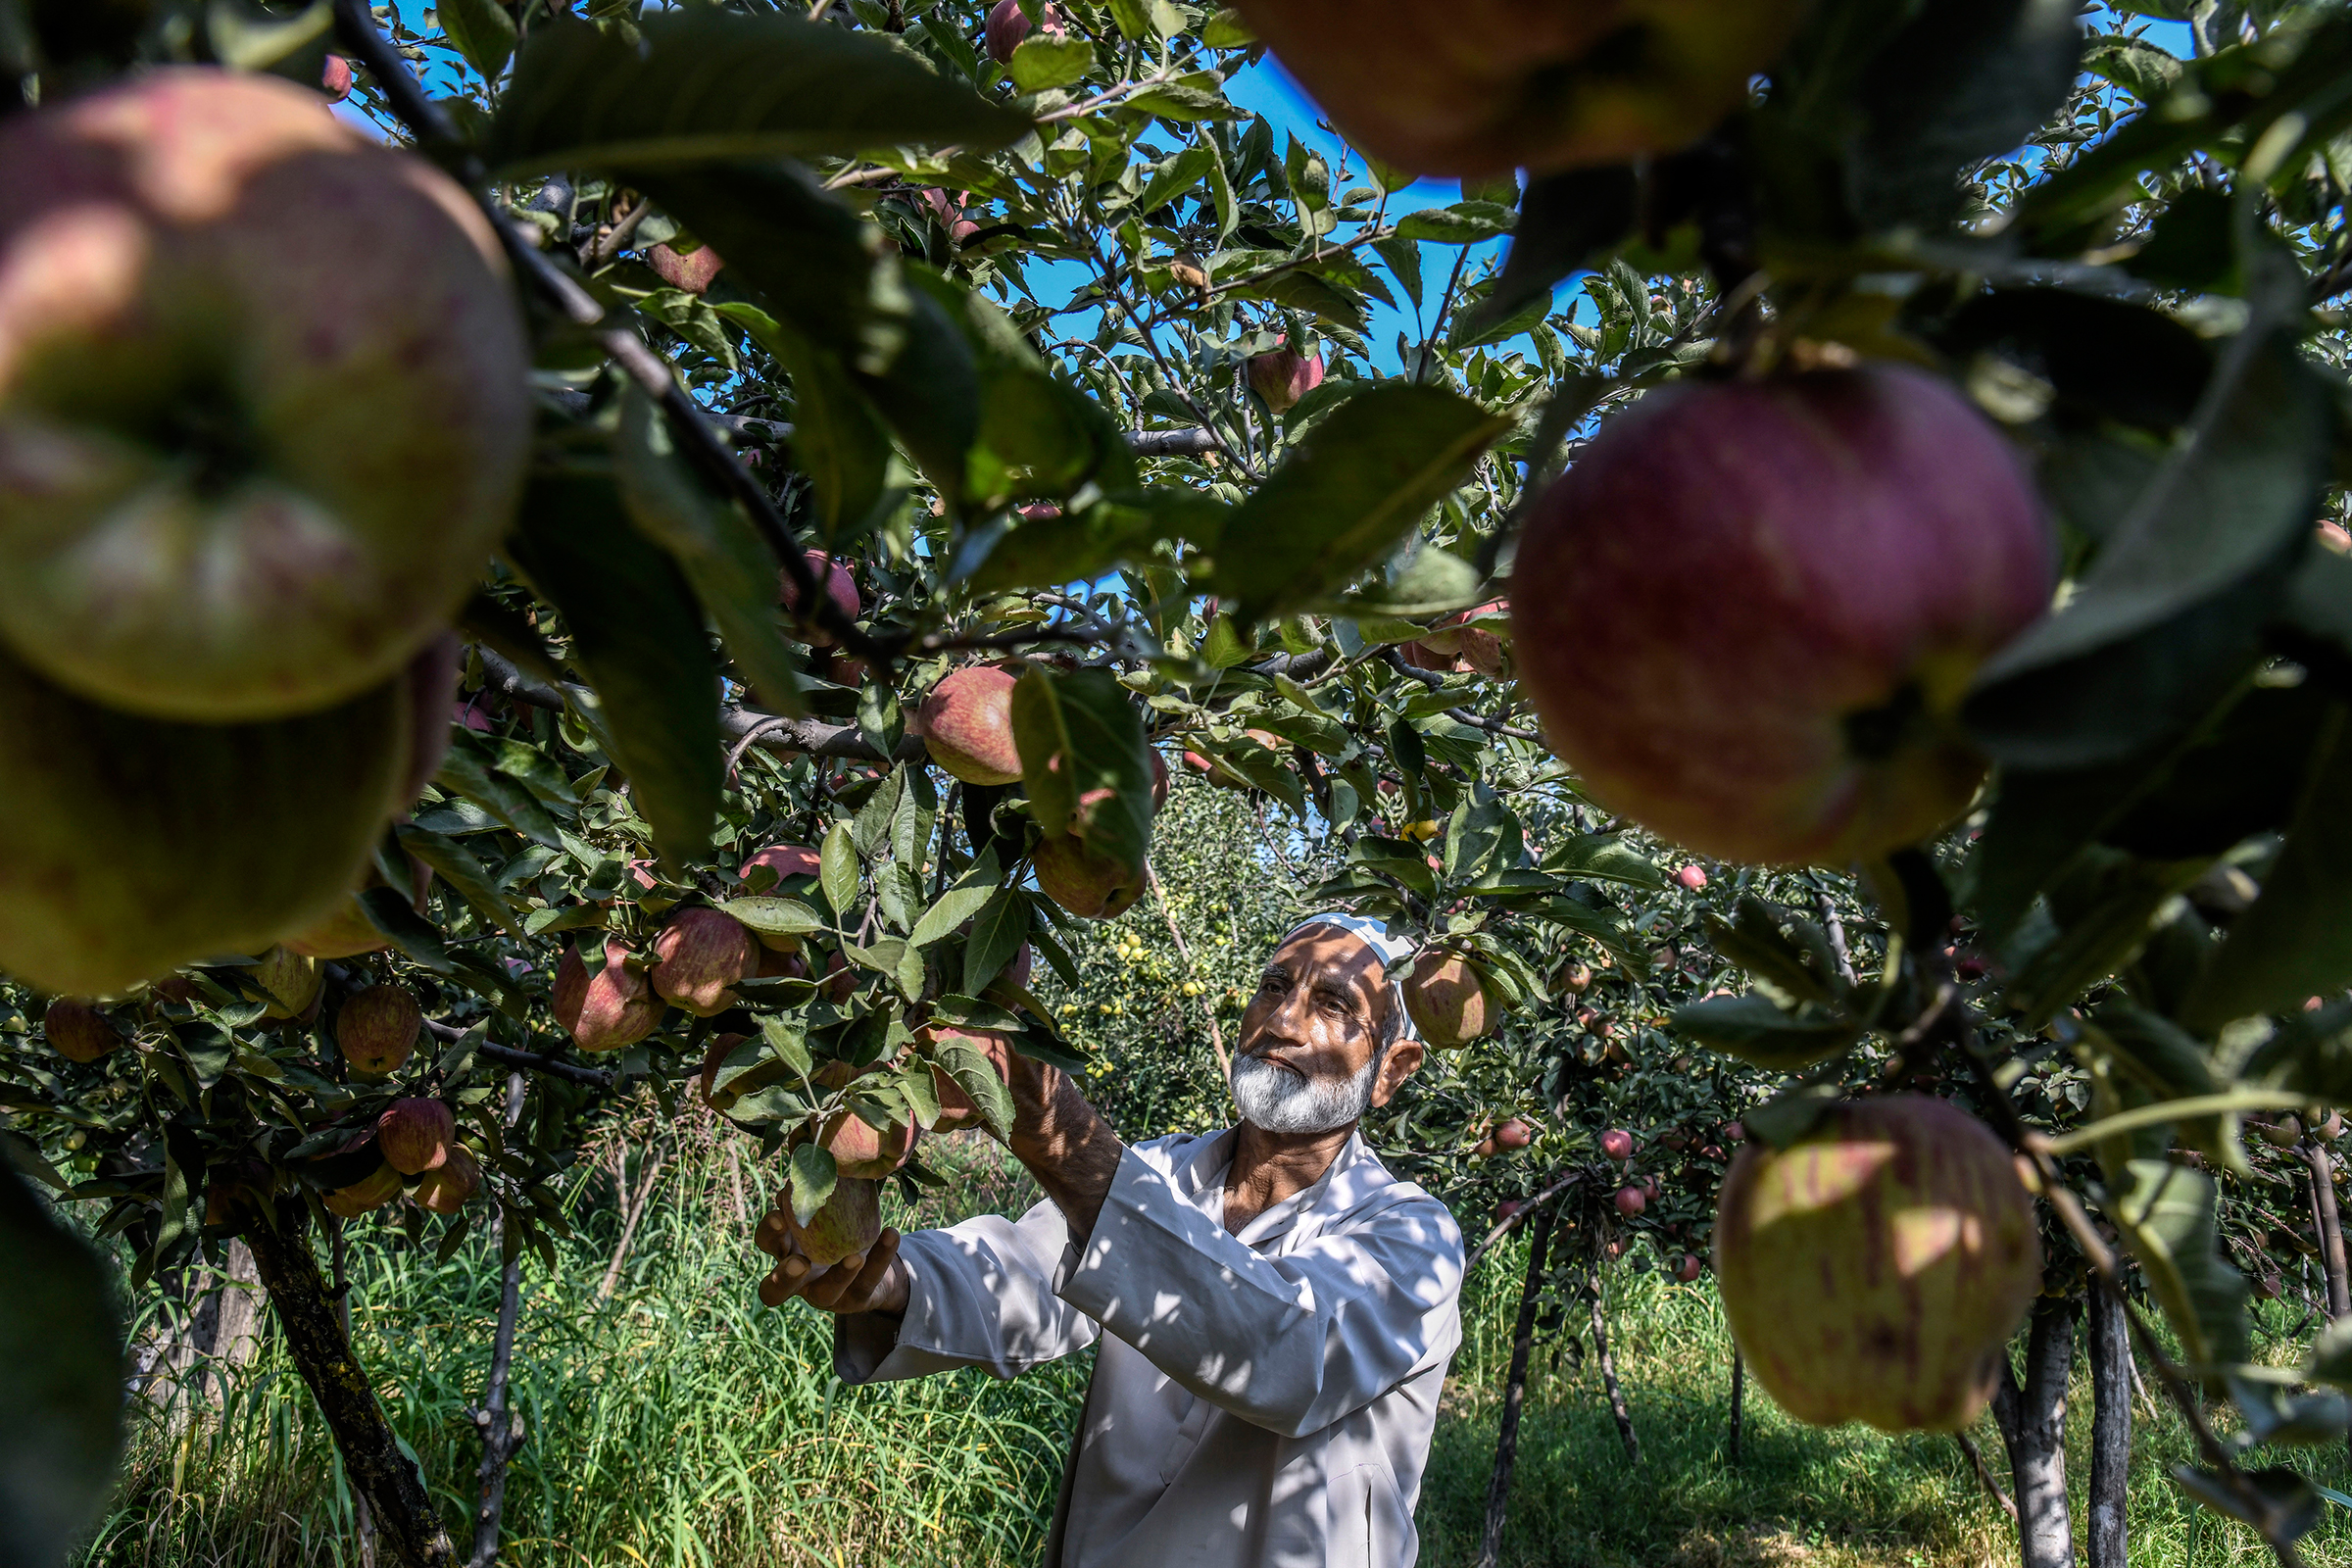 Gh Mohiuddin Mir, 65, who worries that if the Kashmir crisis is not resolved by harvest time he will be financially devastated, at his apple farm in Budgam, India, on Sept. 19, 2019. (Atul Loke—The New York Times/Redux)